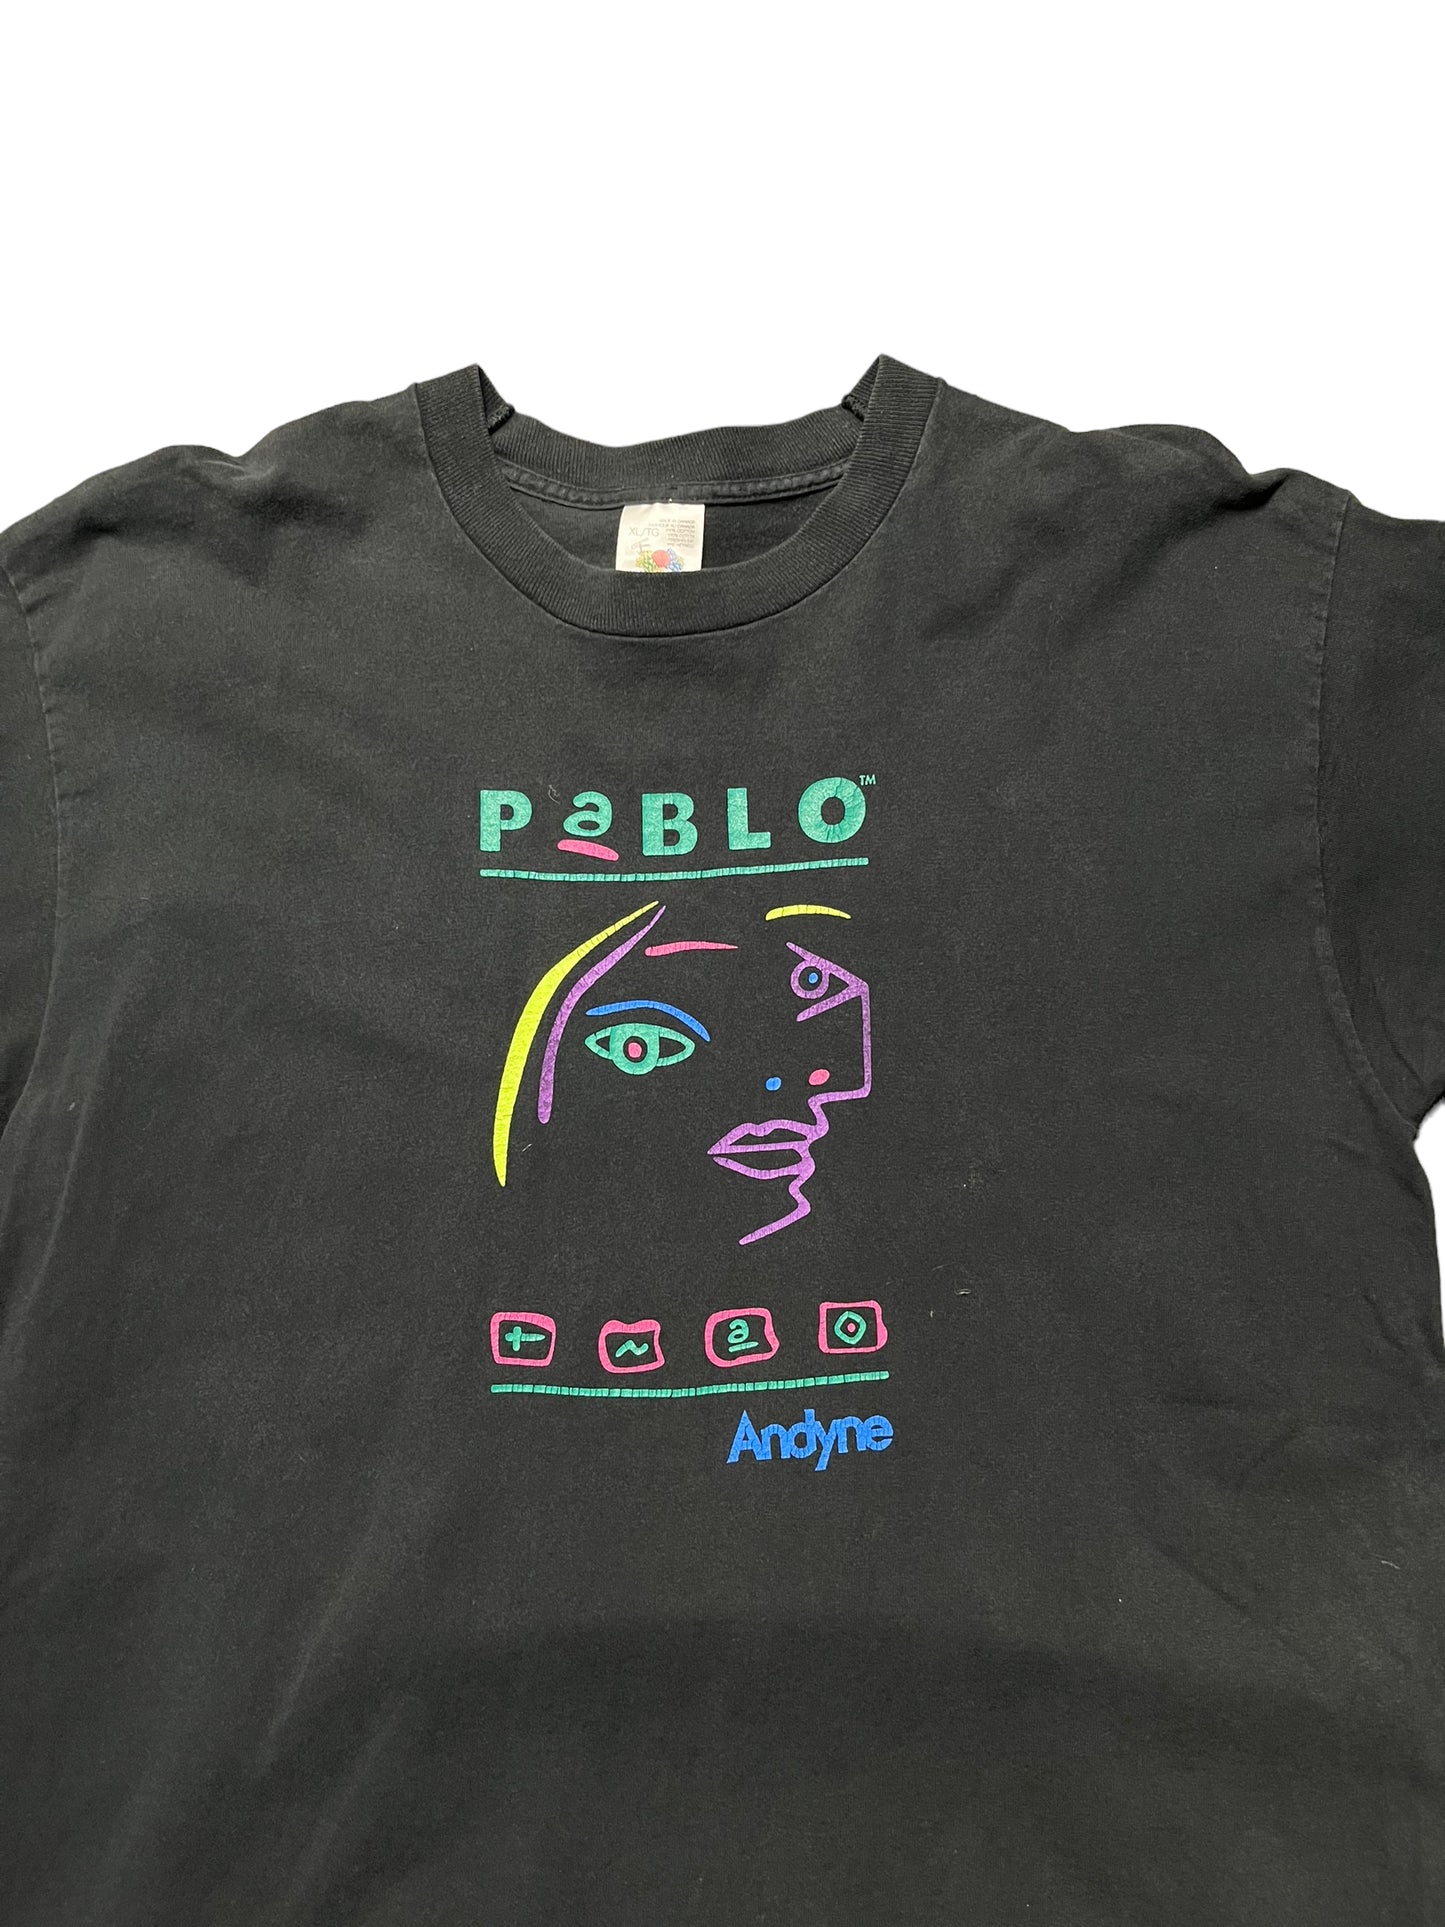 (XL) Vintage Pablo Picasso Andyne Tee